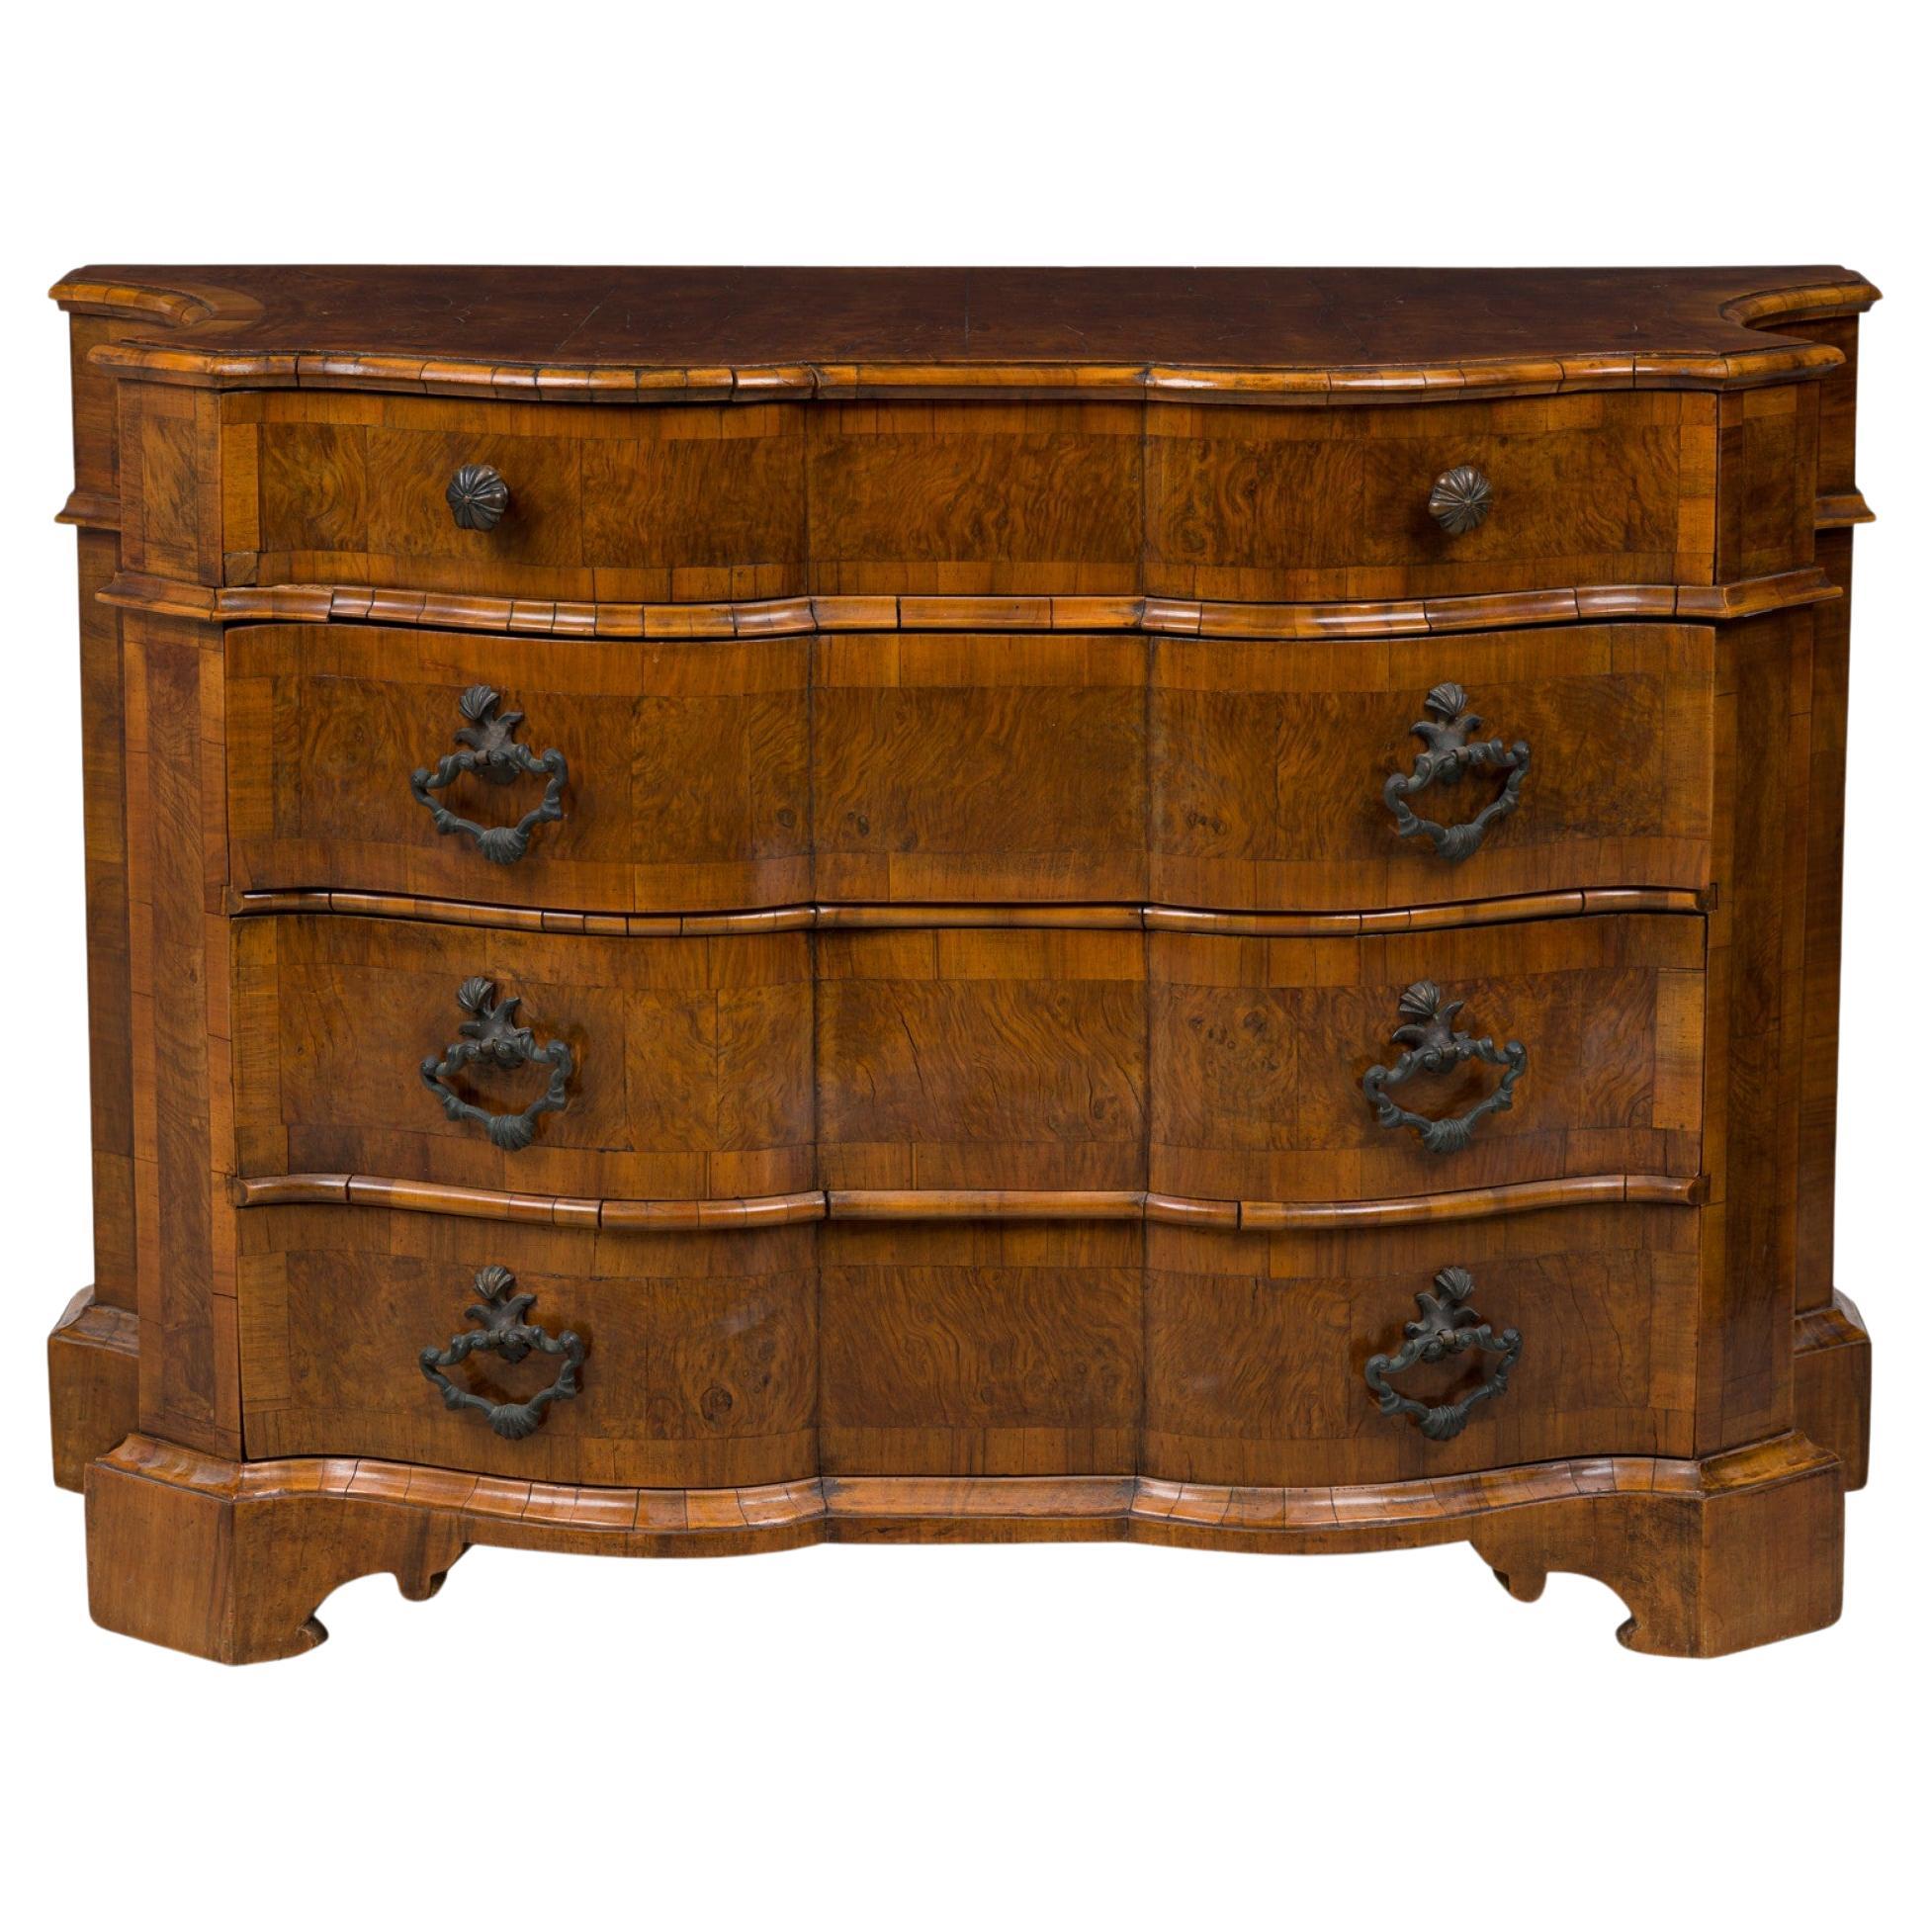 Italian Venetian Serpentine Olivewood & Bronze Mounted 4 Drawer Commode / Chest For Sale